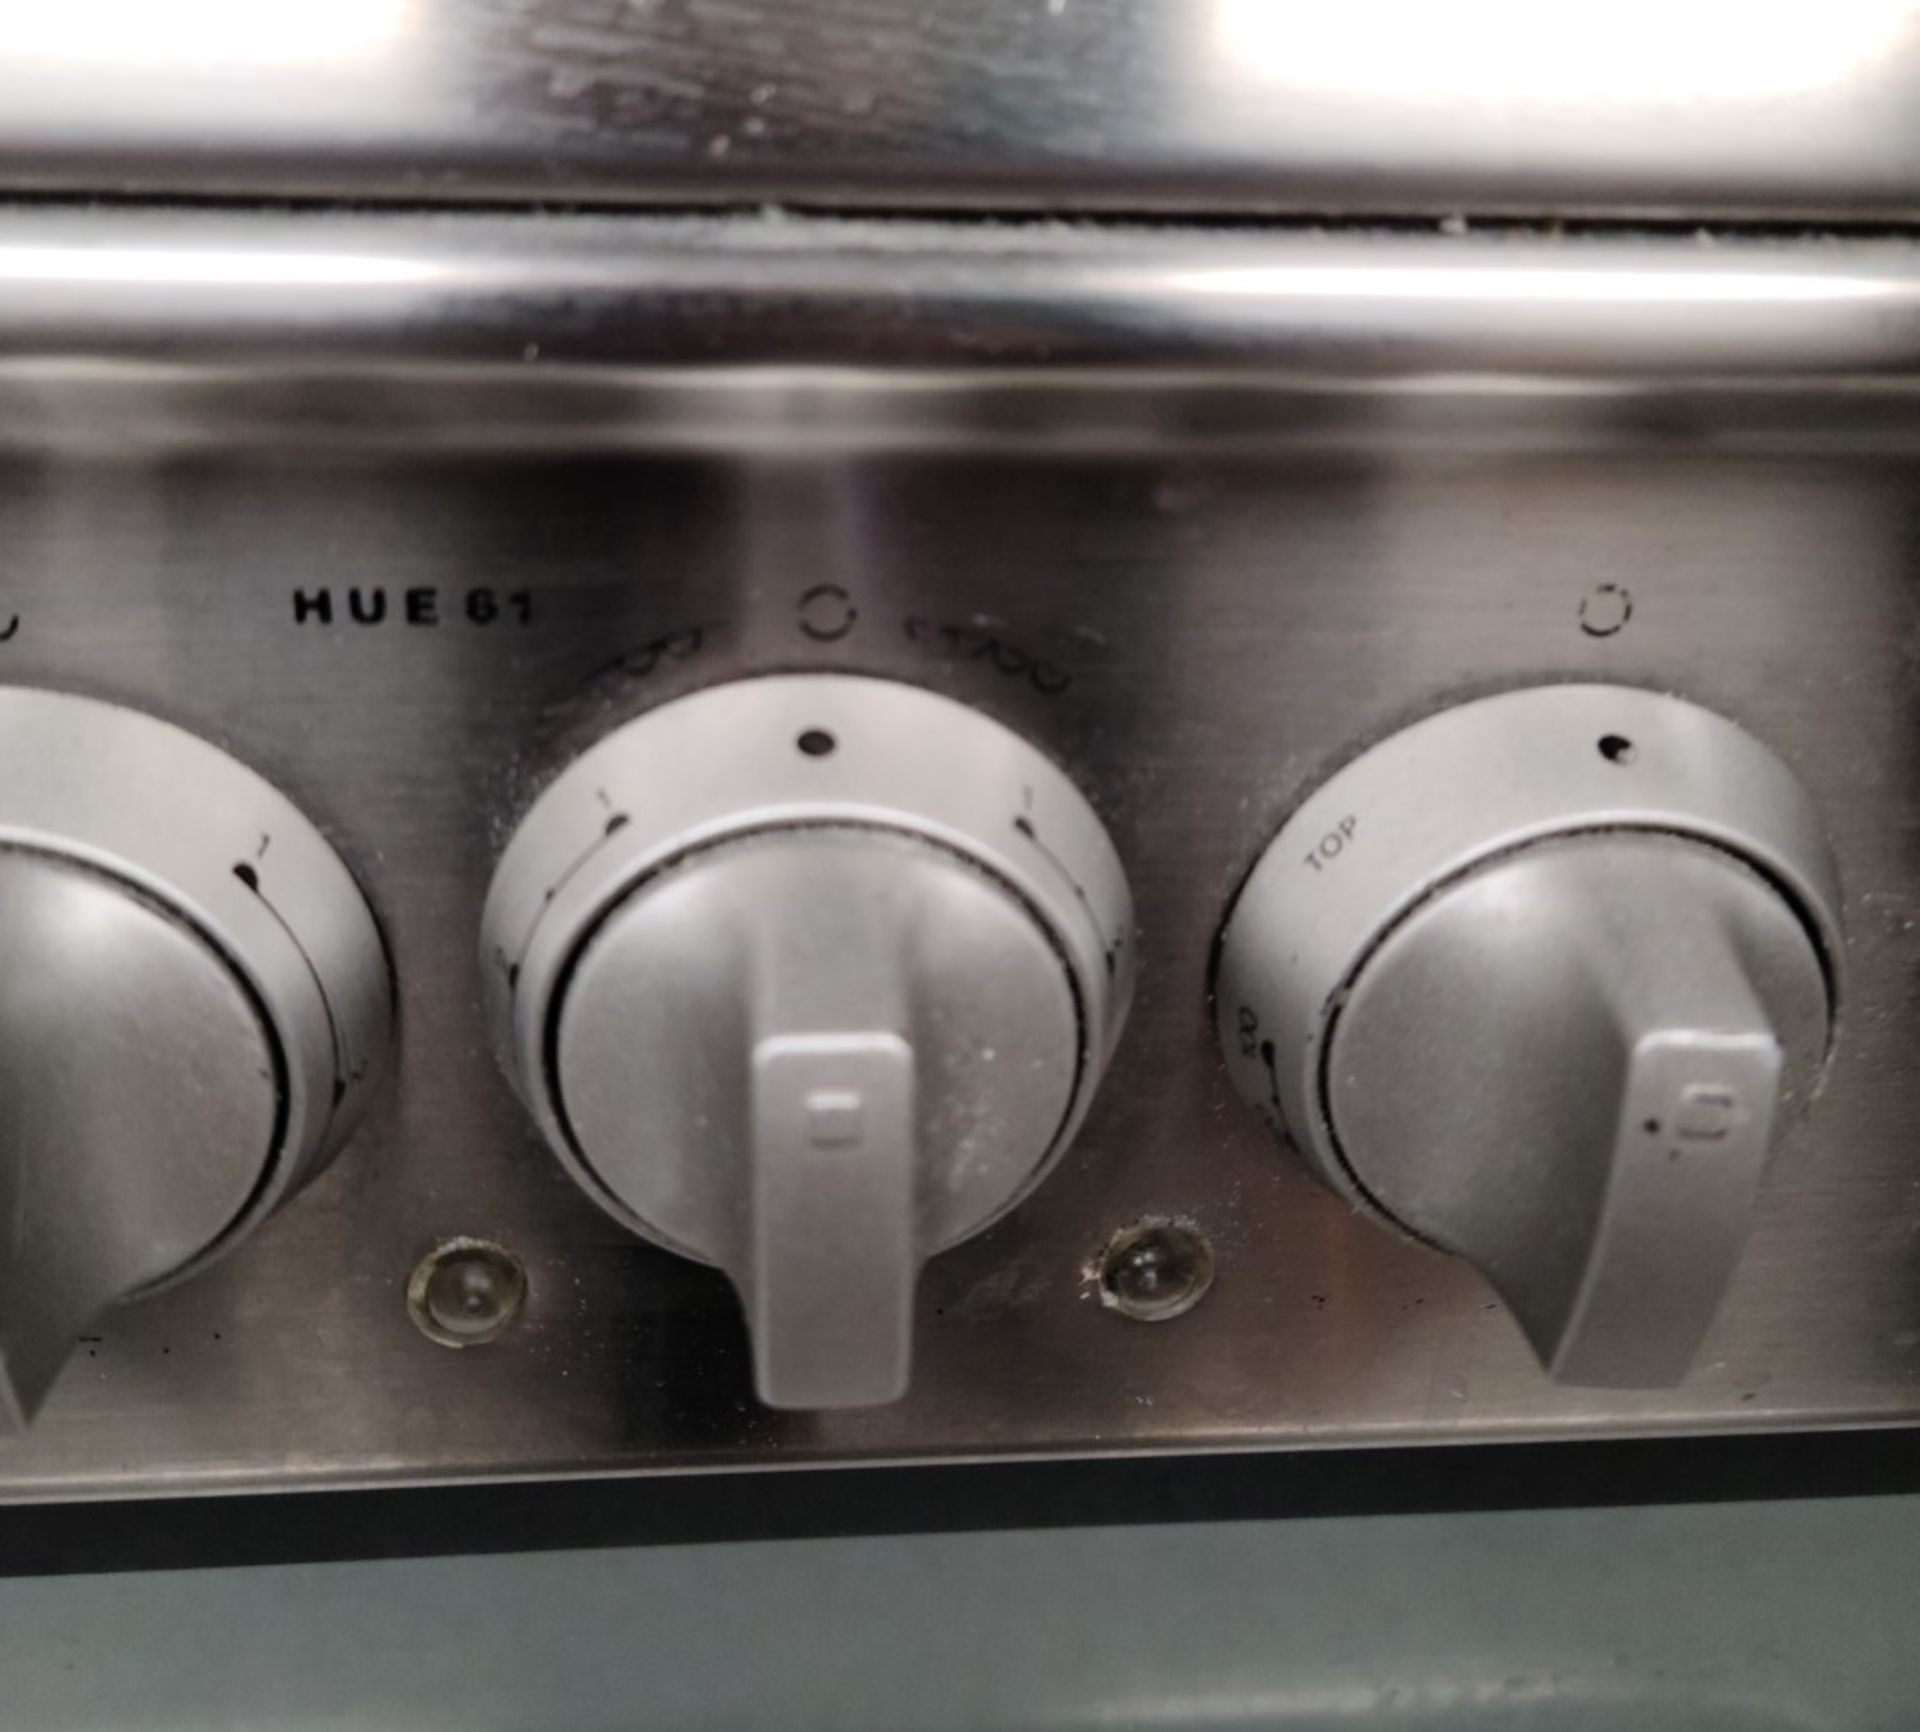 1 x HOTPOINT HUI611X Electric Cooker In Stainless Steel With Electric Fan & Conventional Oven - Image 4 of 9